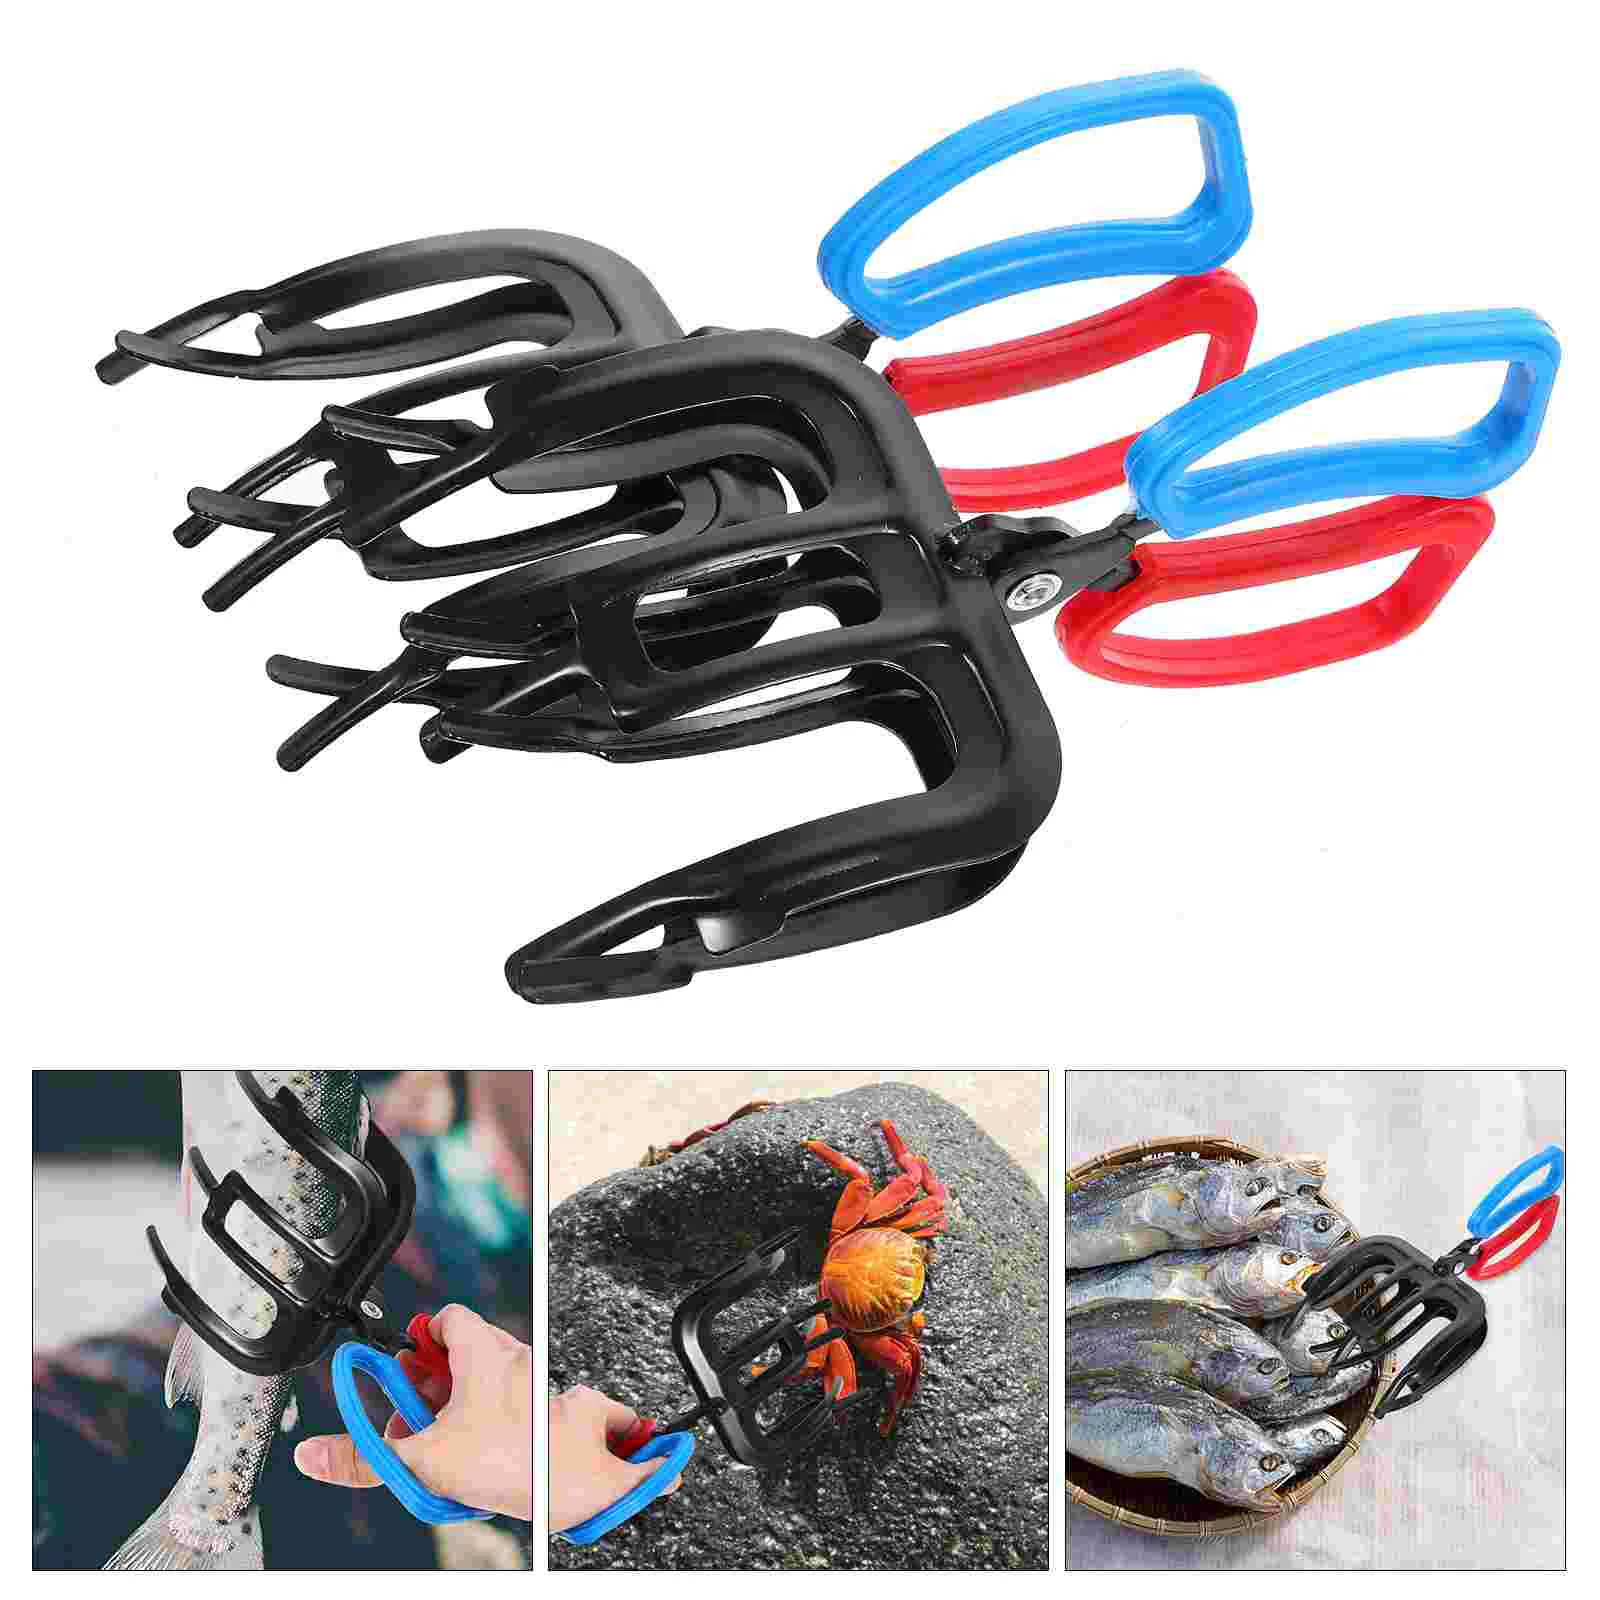 

Fishing Gear Fish Gripper Grip Holder Fishing Controller Fishing Locking Clamp Grabber Fish Clip Hand Controller With Lock